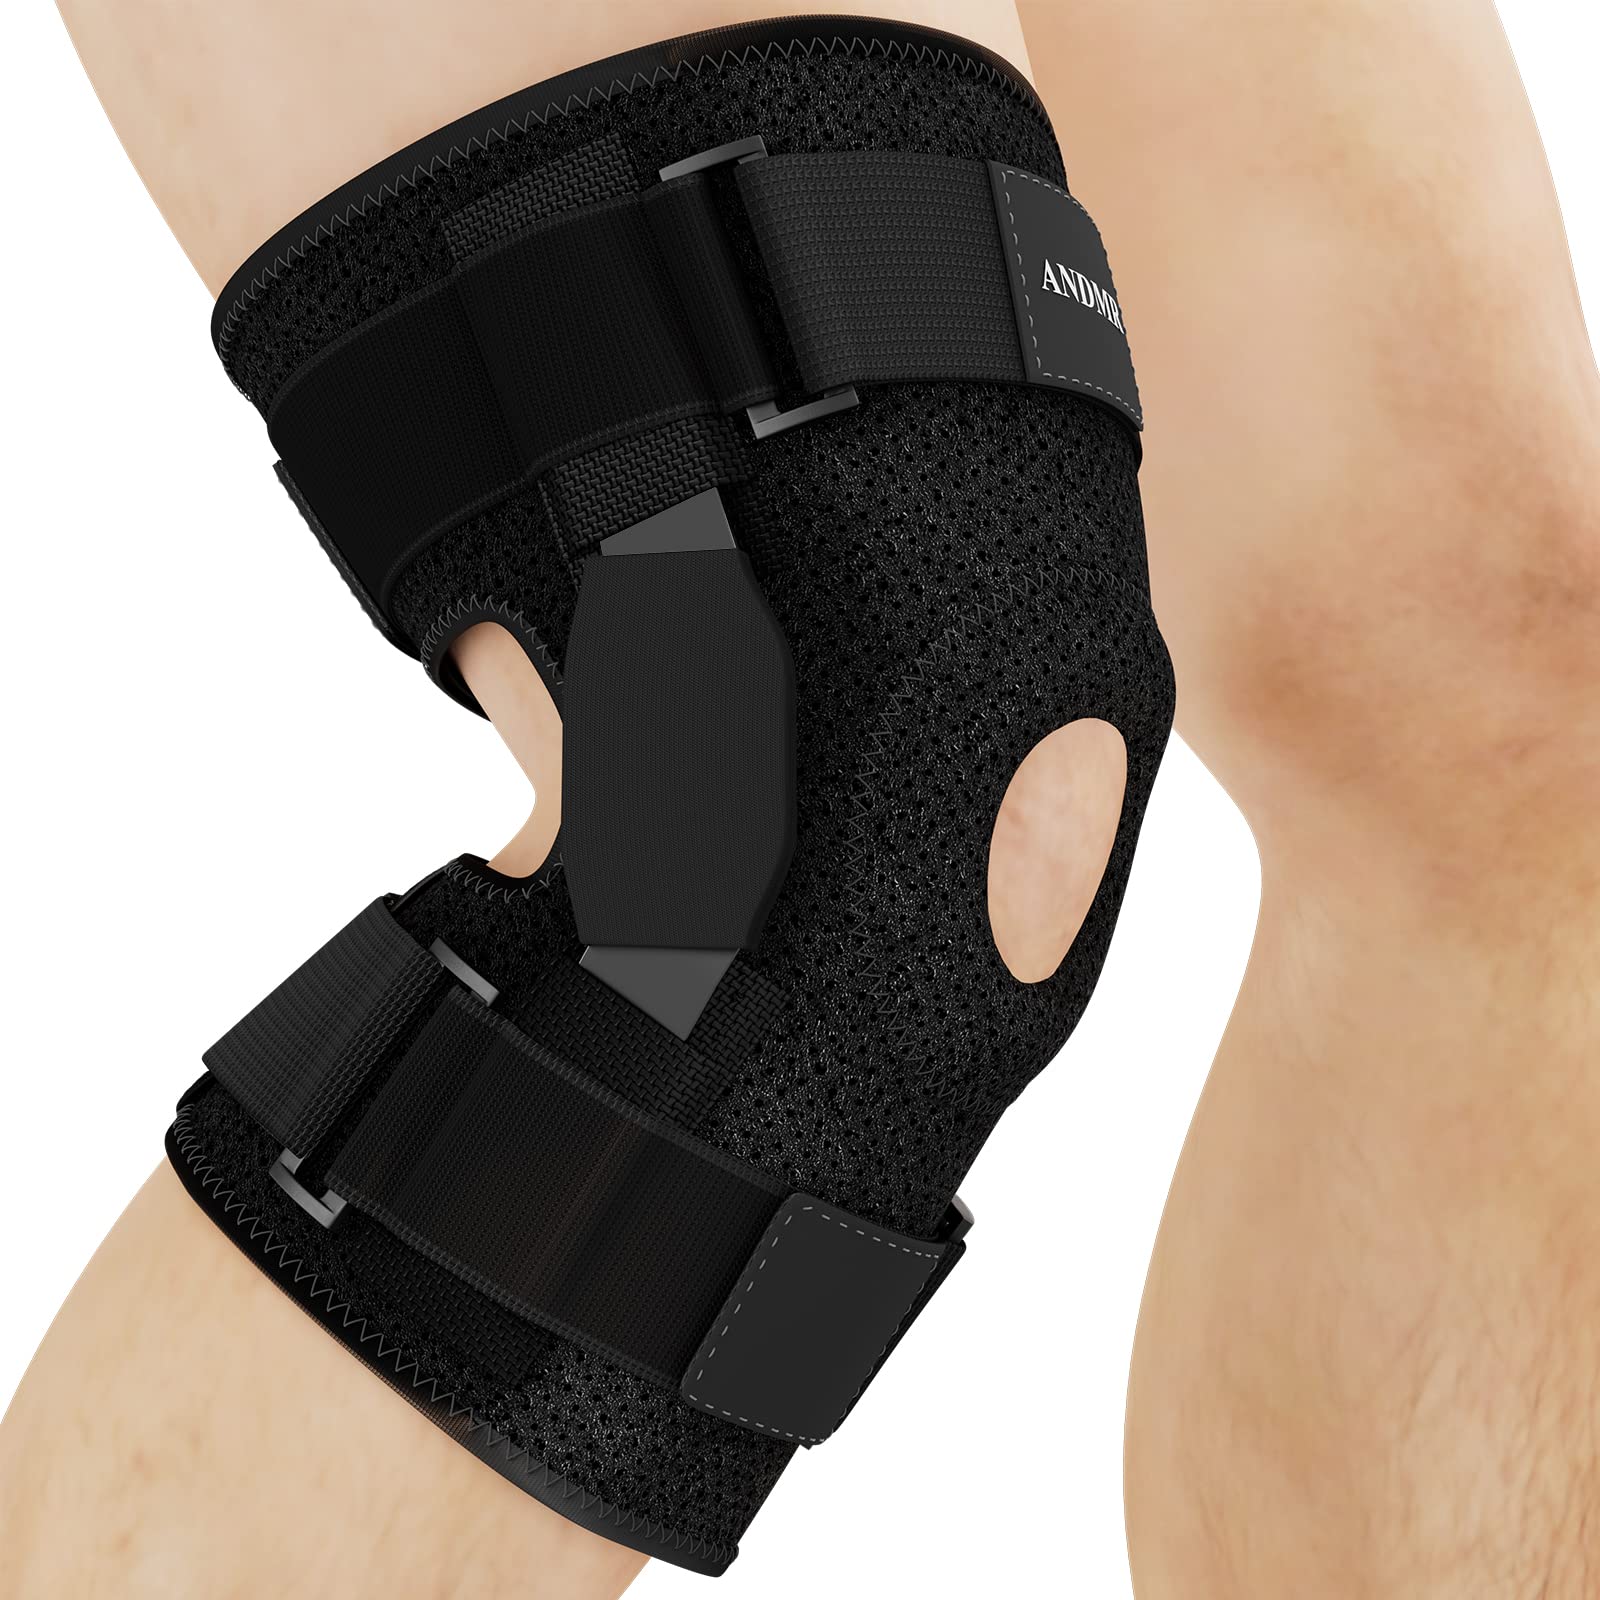  Vive Hinged Knee Brace - Relieves ACL, MCL, Meniscus